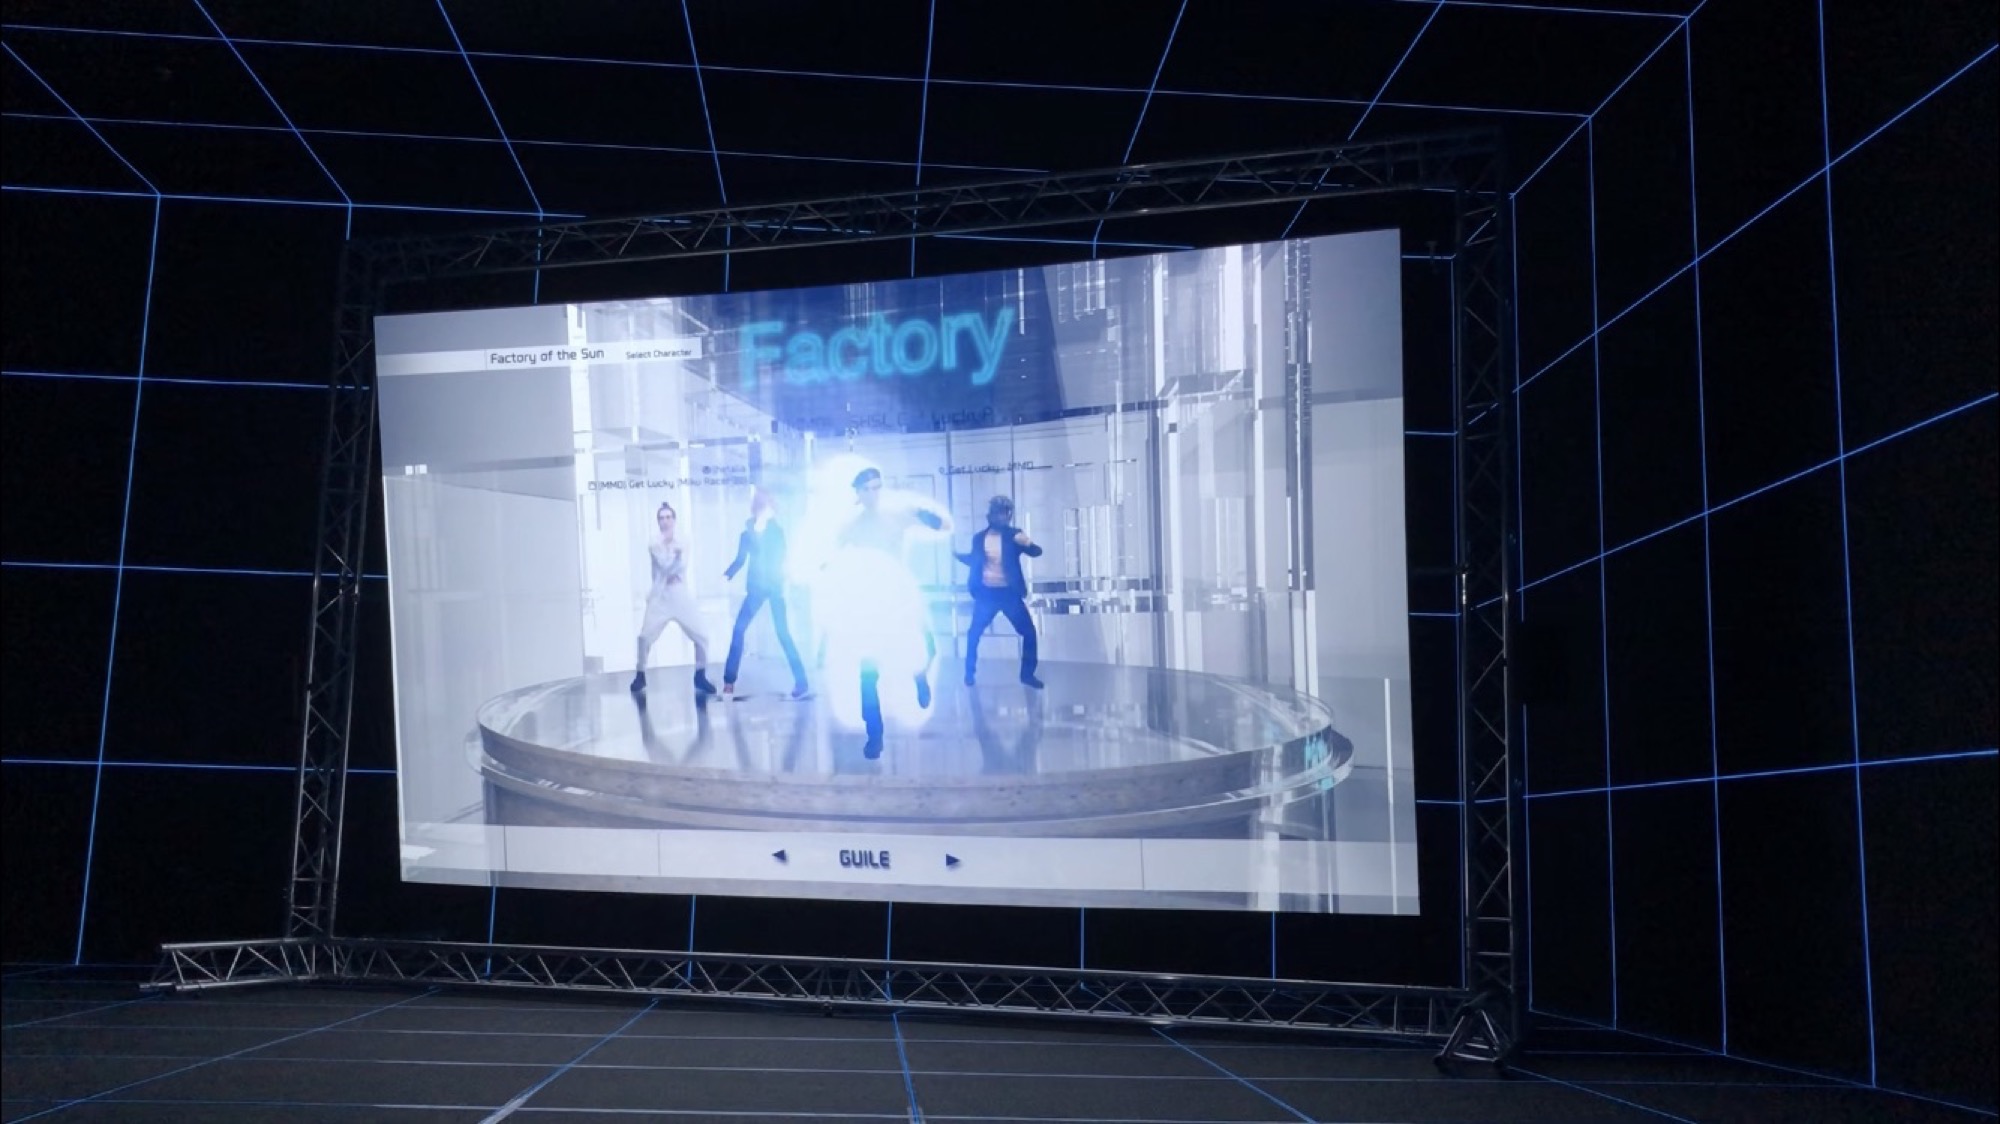 Hito Steyerl, <em>Factory of the Sun,</em> 2015. Installation view at National Gallery of Victoria. Photo: Amelia Winata.